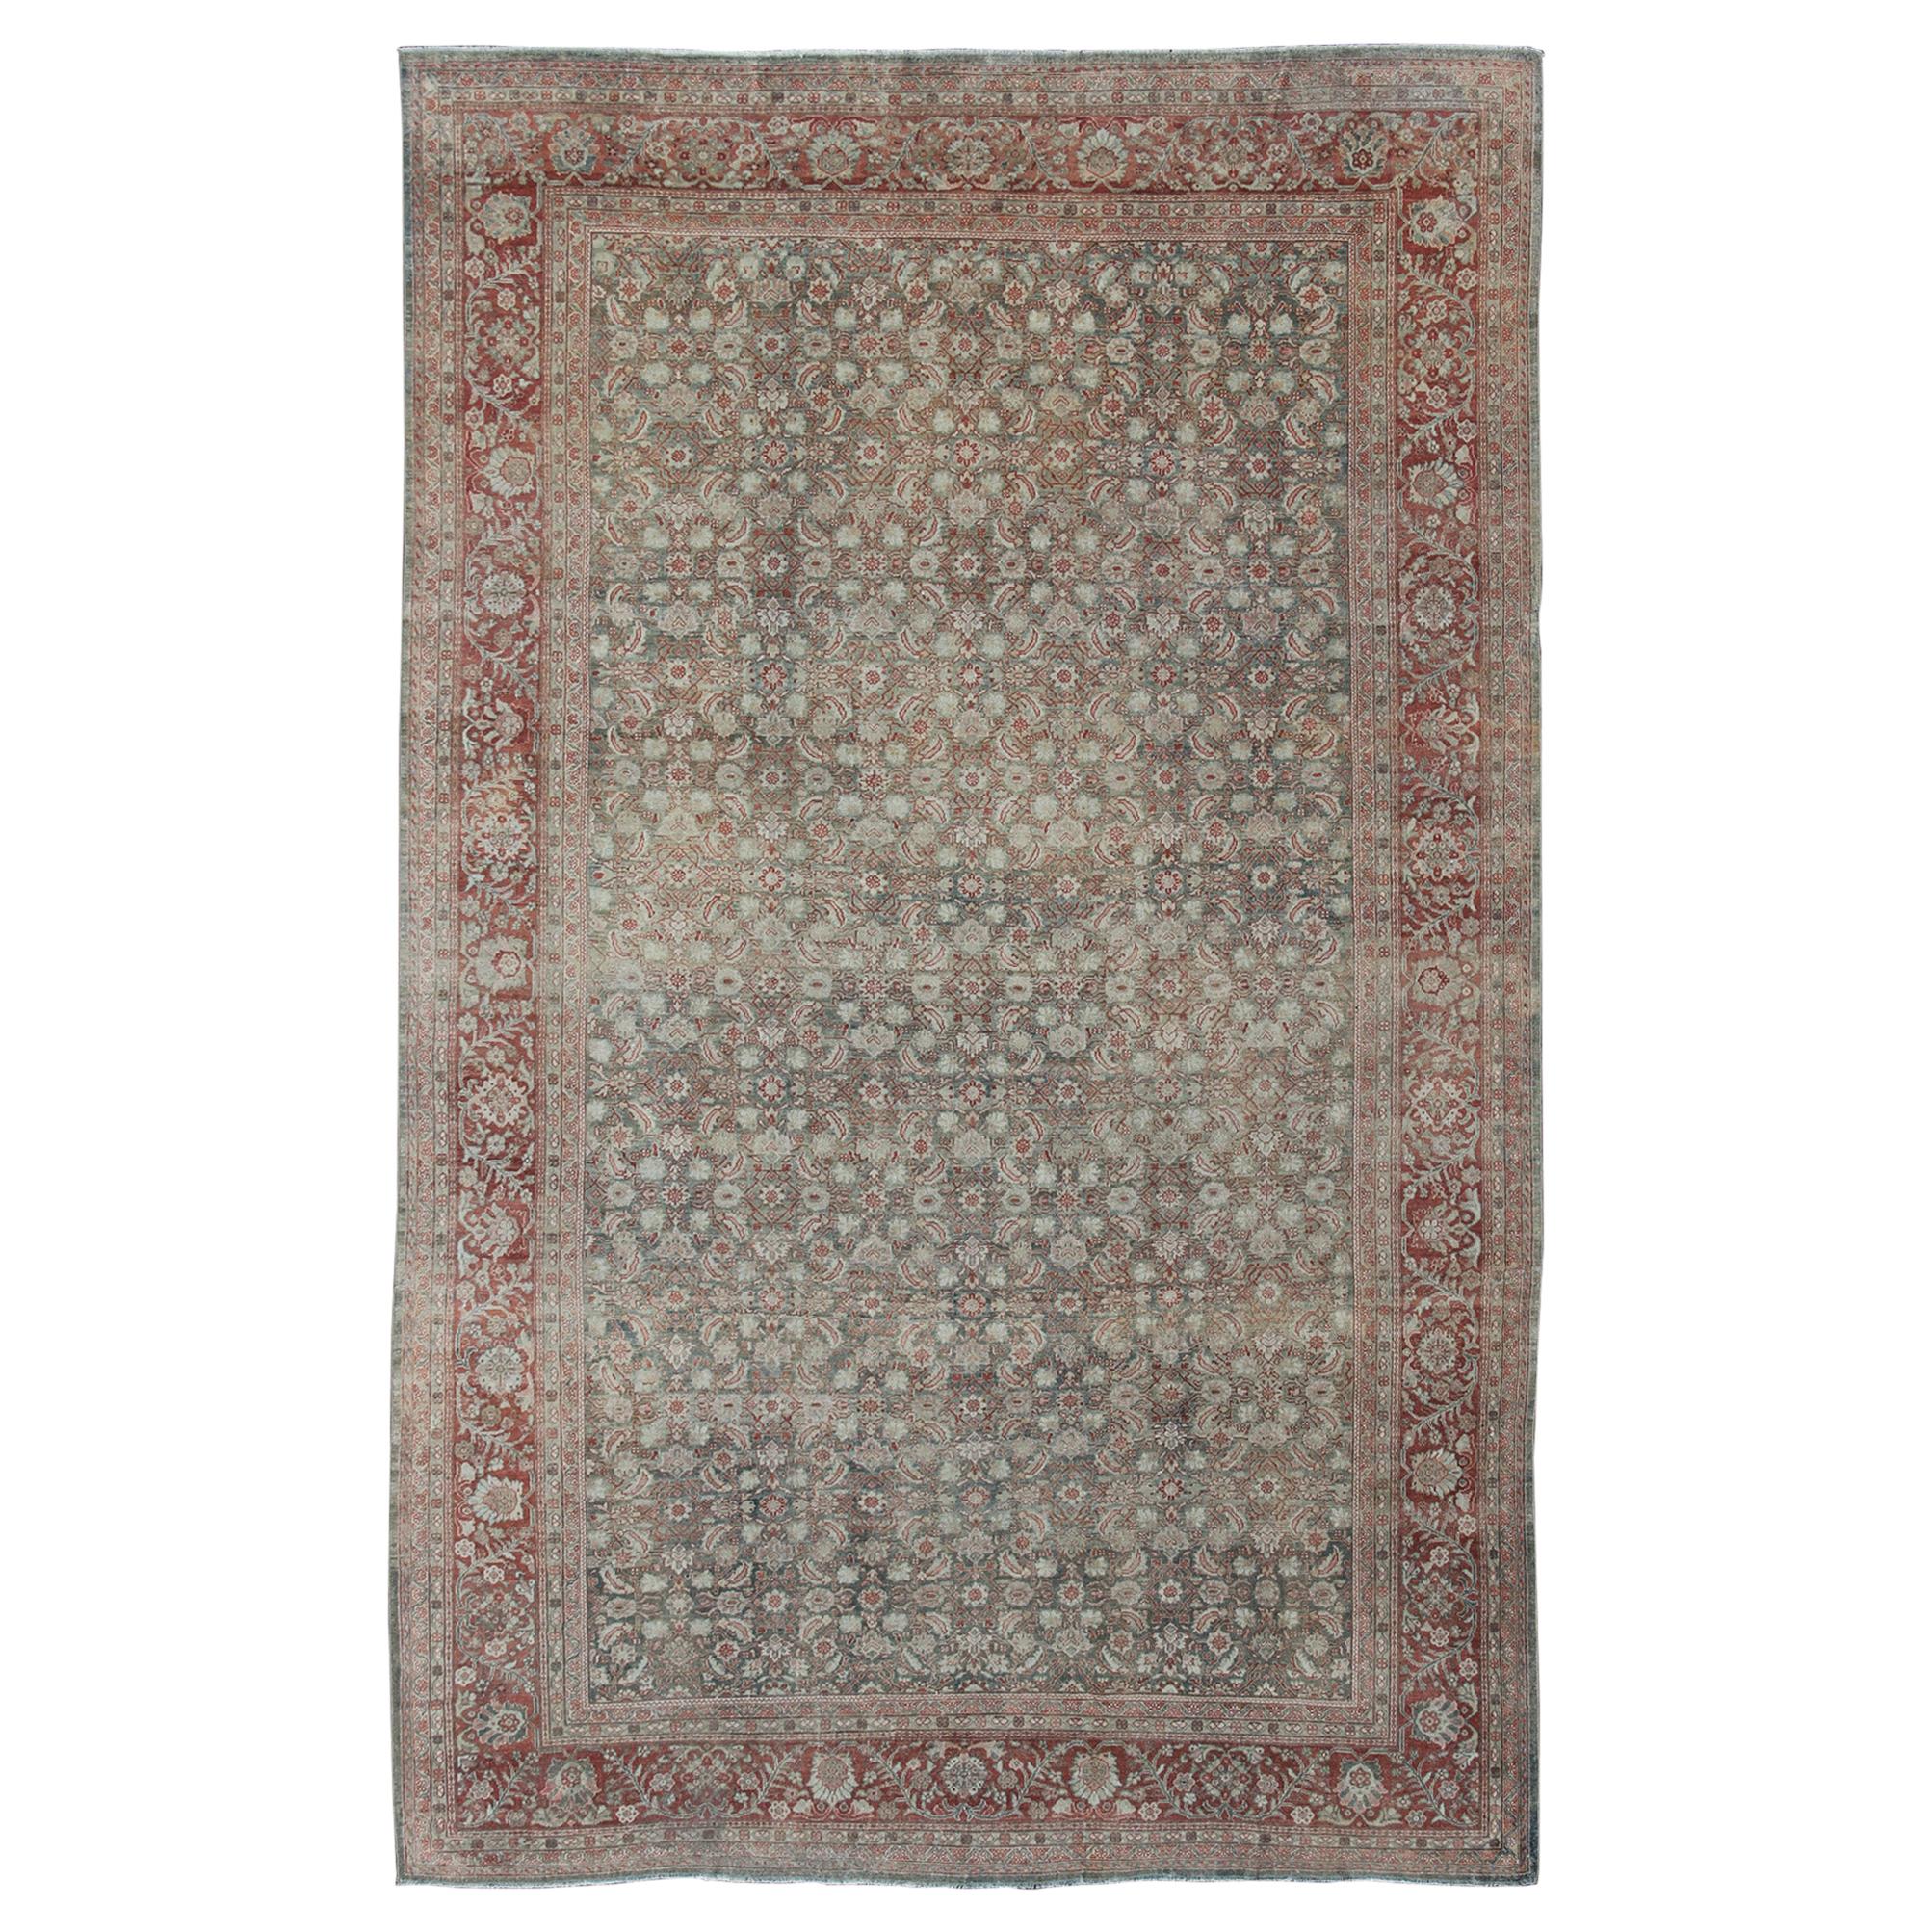 Distressed Antique Persian Sultanabad Rug in Faded Blue Background